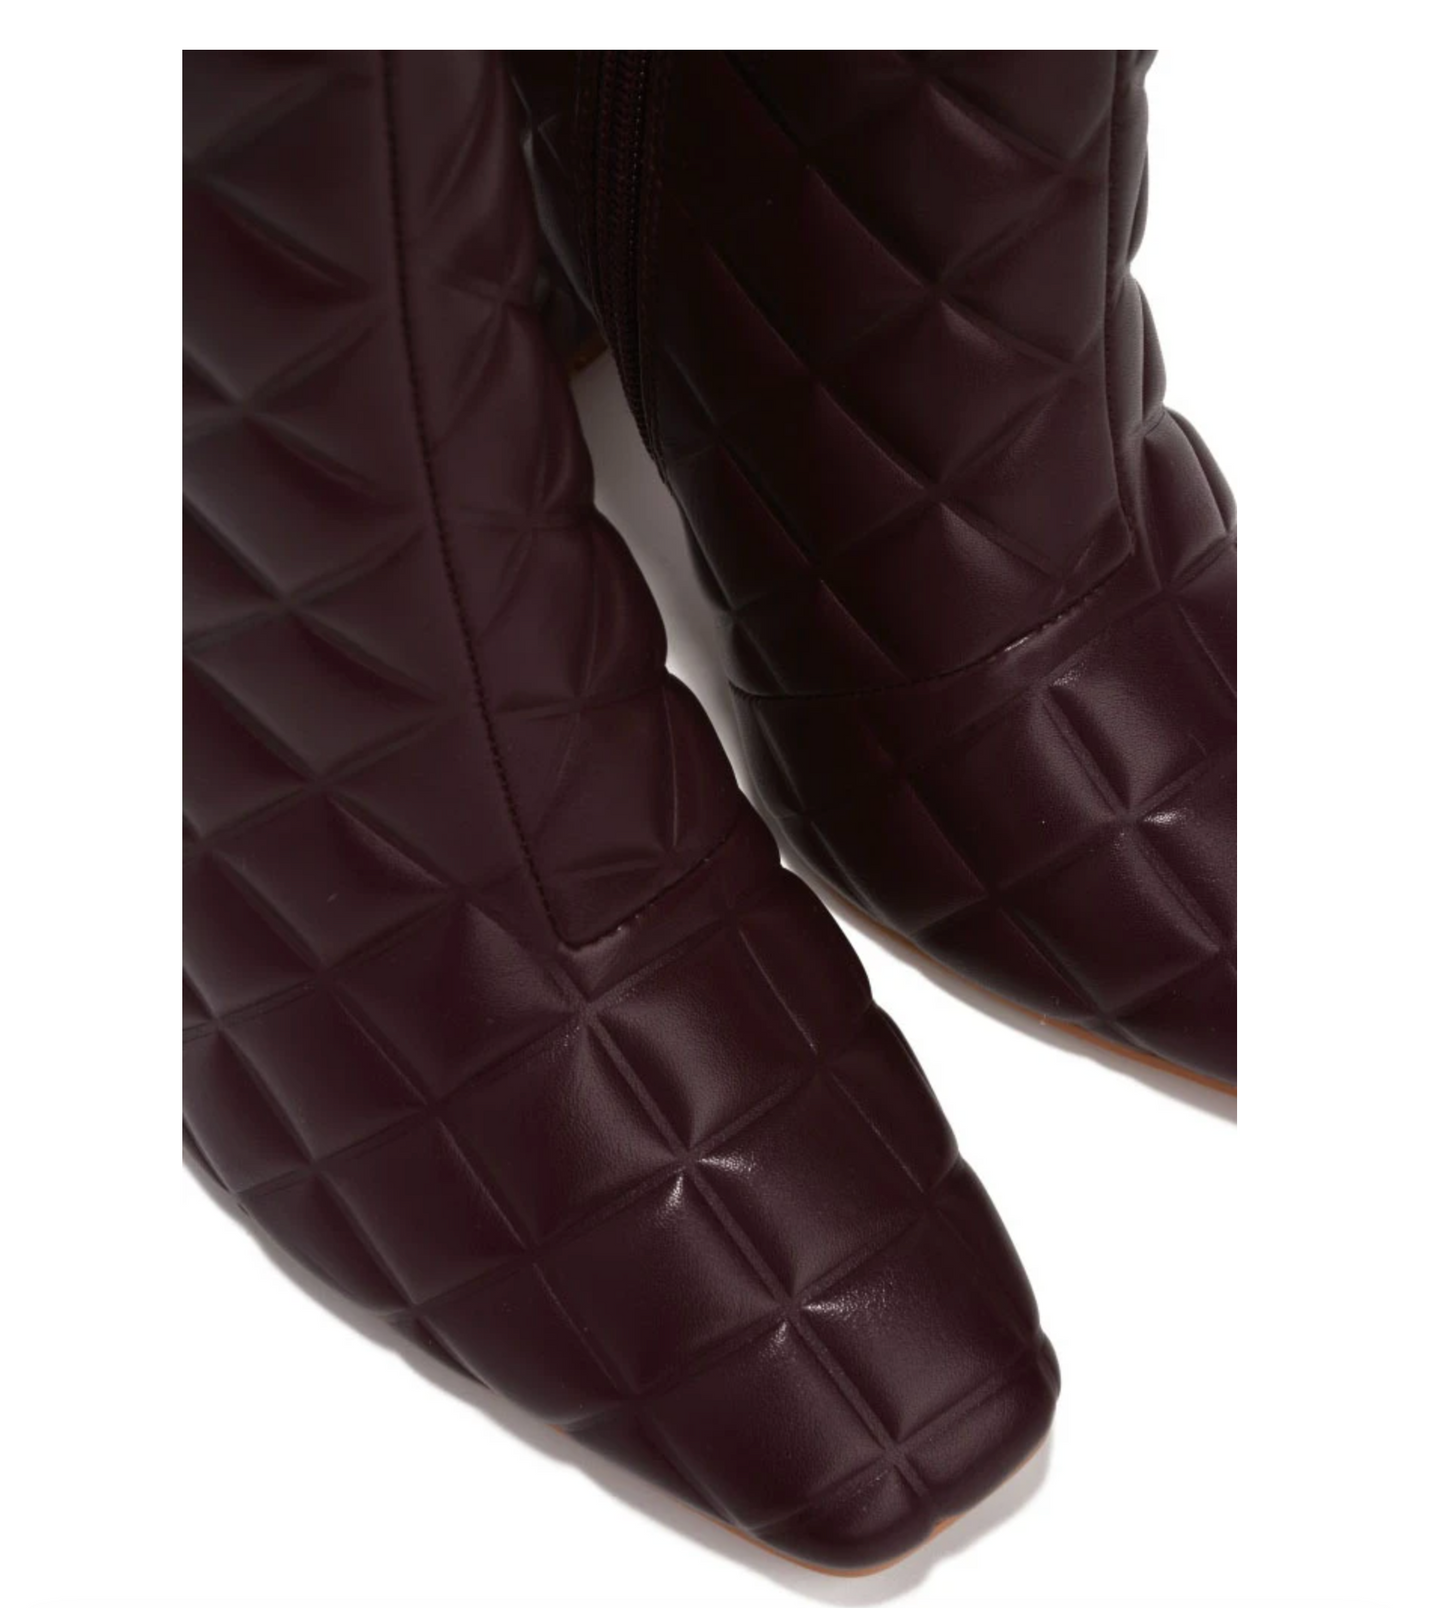 "Ava" Brown Quilted Booties